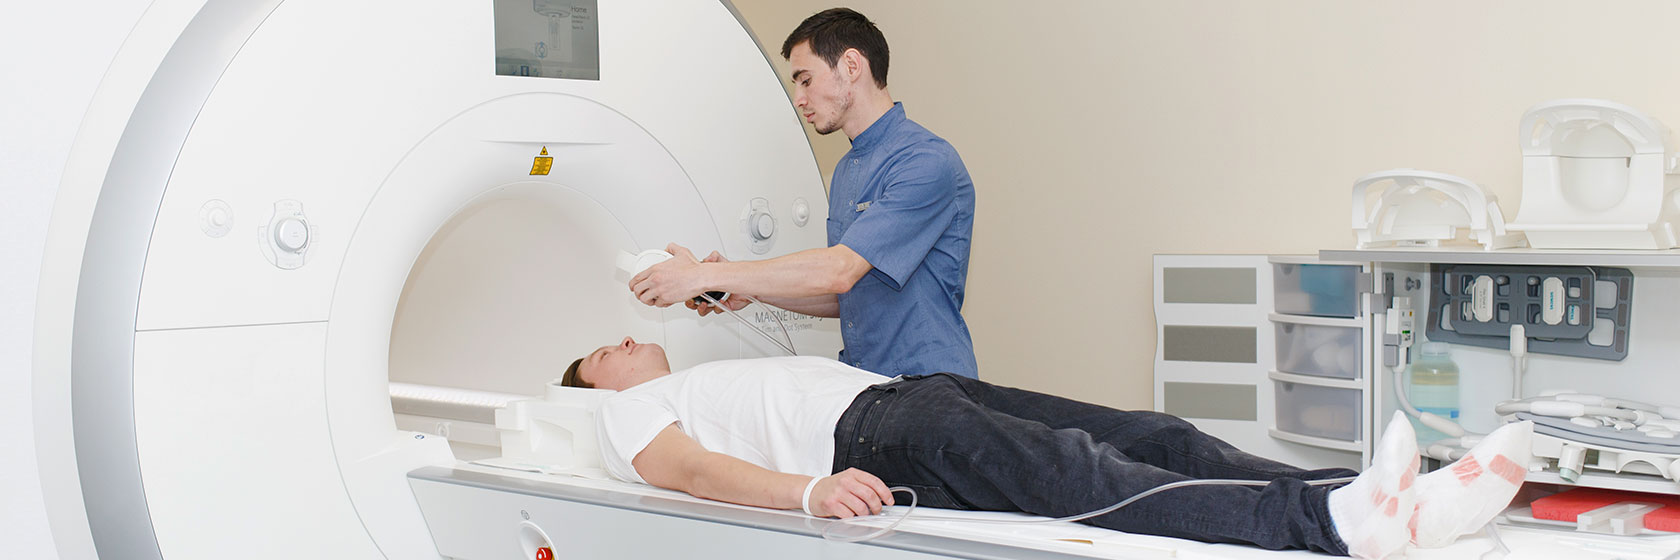 MIBS technician is conducting an MRI examination of a patient with the high-field Skyra3T scanner